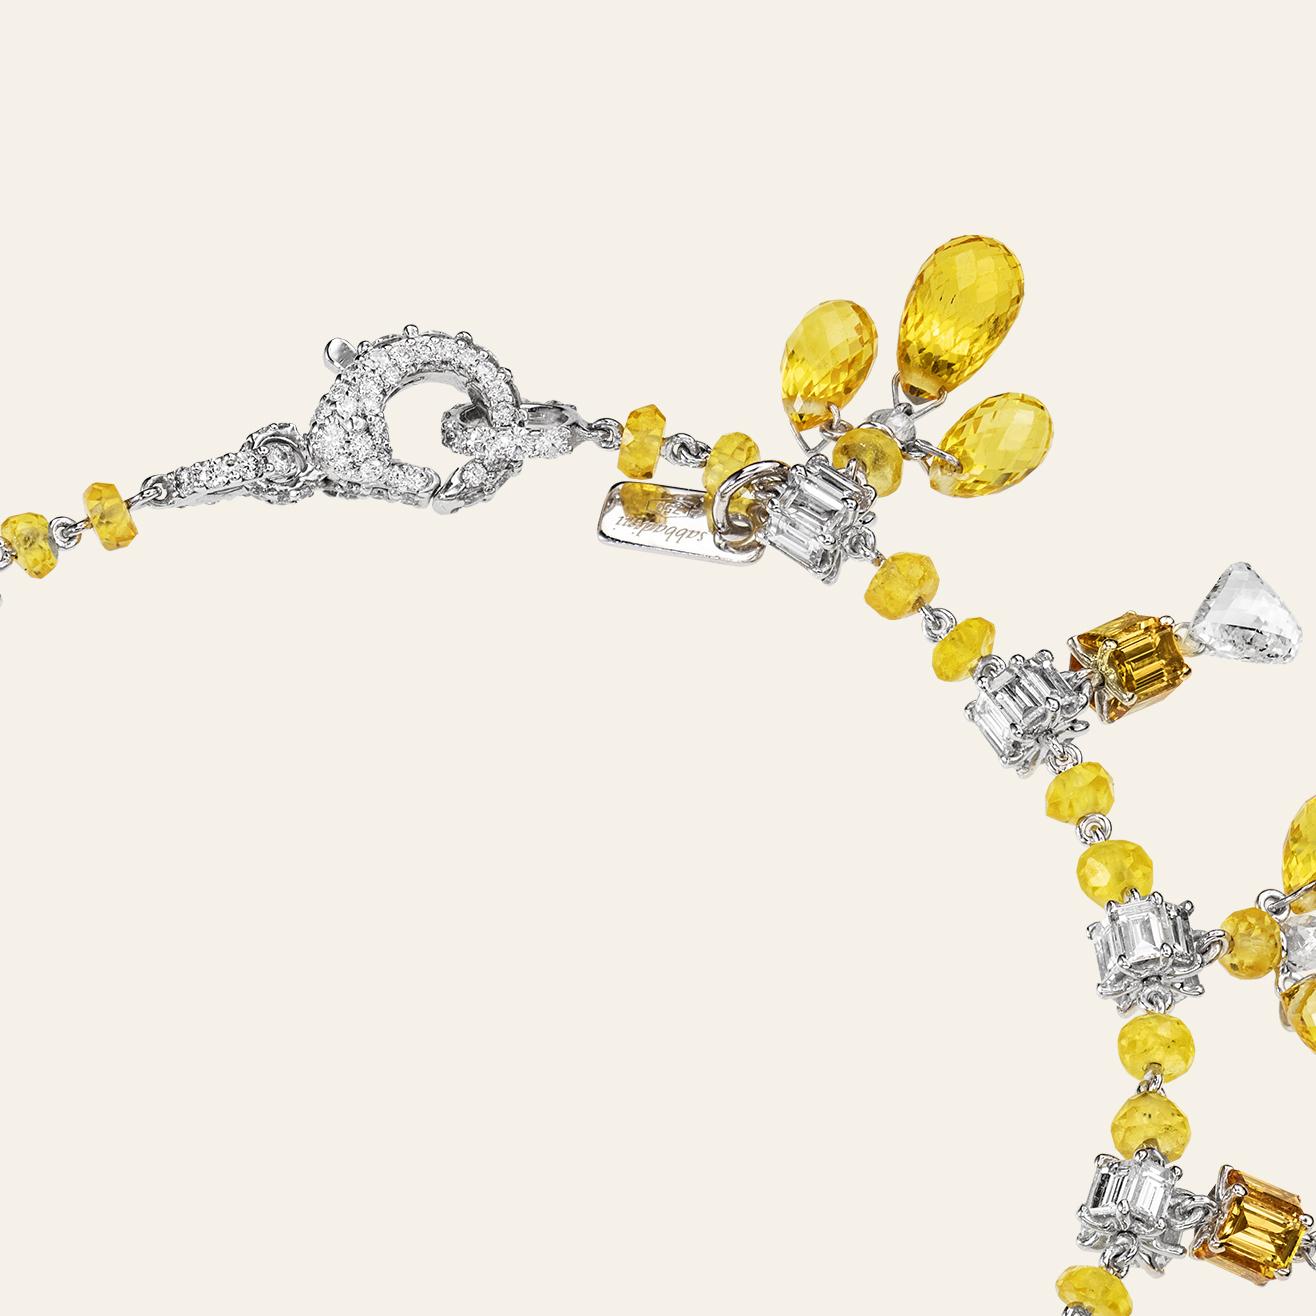 Sabbadini Jewelry Yellow Sapphire Charm Bracelet 
18k White gold charm bracelet, fancy shape cut yellow sapphires 29,32ct and diamonds 4,32ct. Gold 5,44
Handmade & designed in Milan, in Via Montenapoleone.
This item comes directly from the Sabbadini